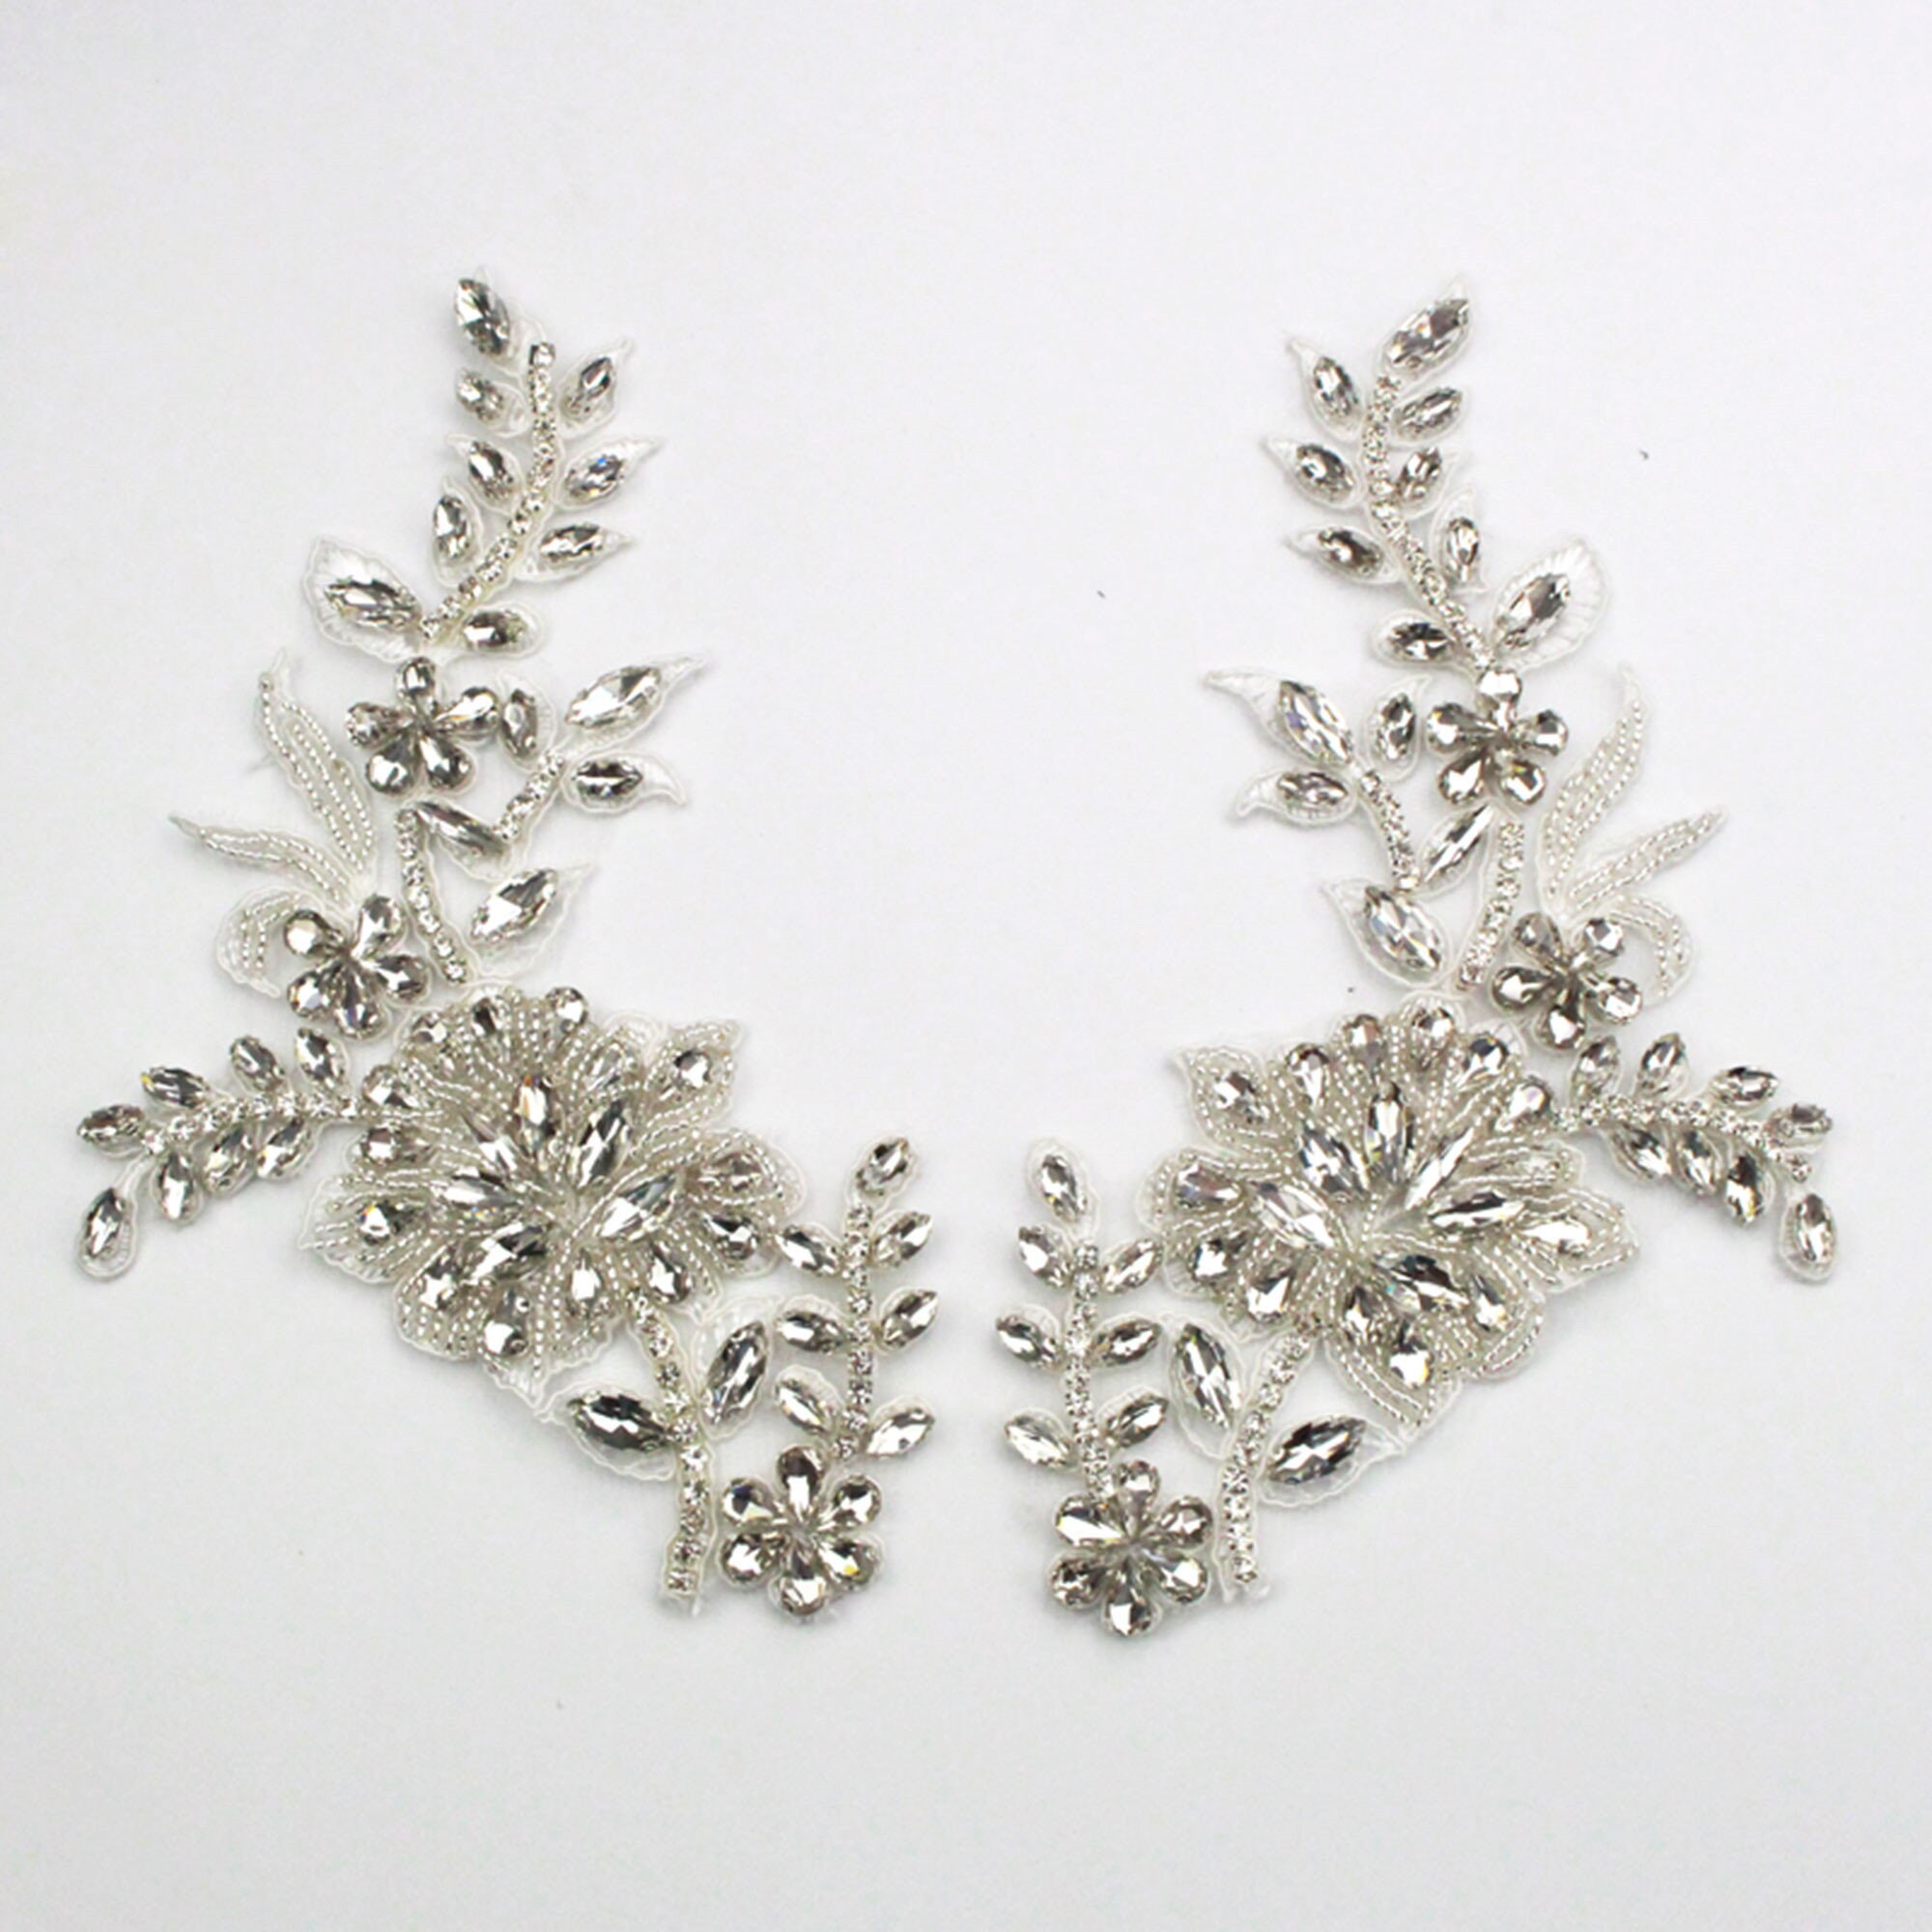  2pc/Pair Luxury Glass Rhinestone Beaded Patches for Clothes DIY  6.45*6.89 sew on Flower Rhinestone Appliques for Wedding Dresses  Embroiderd Appliques (A25)… : Arts, Crafts & Sewing